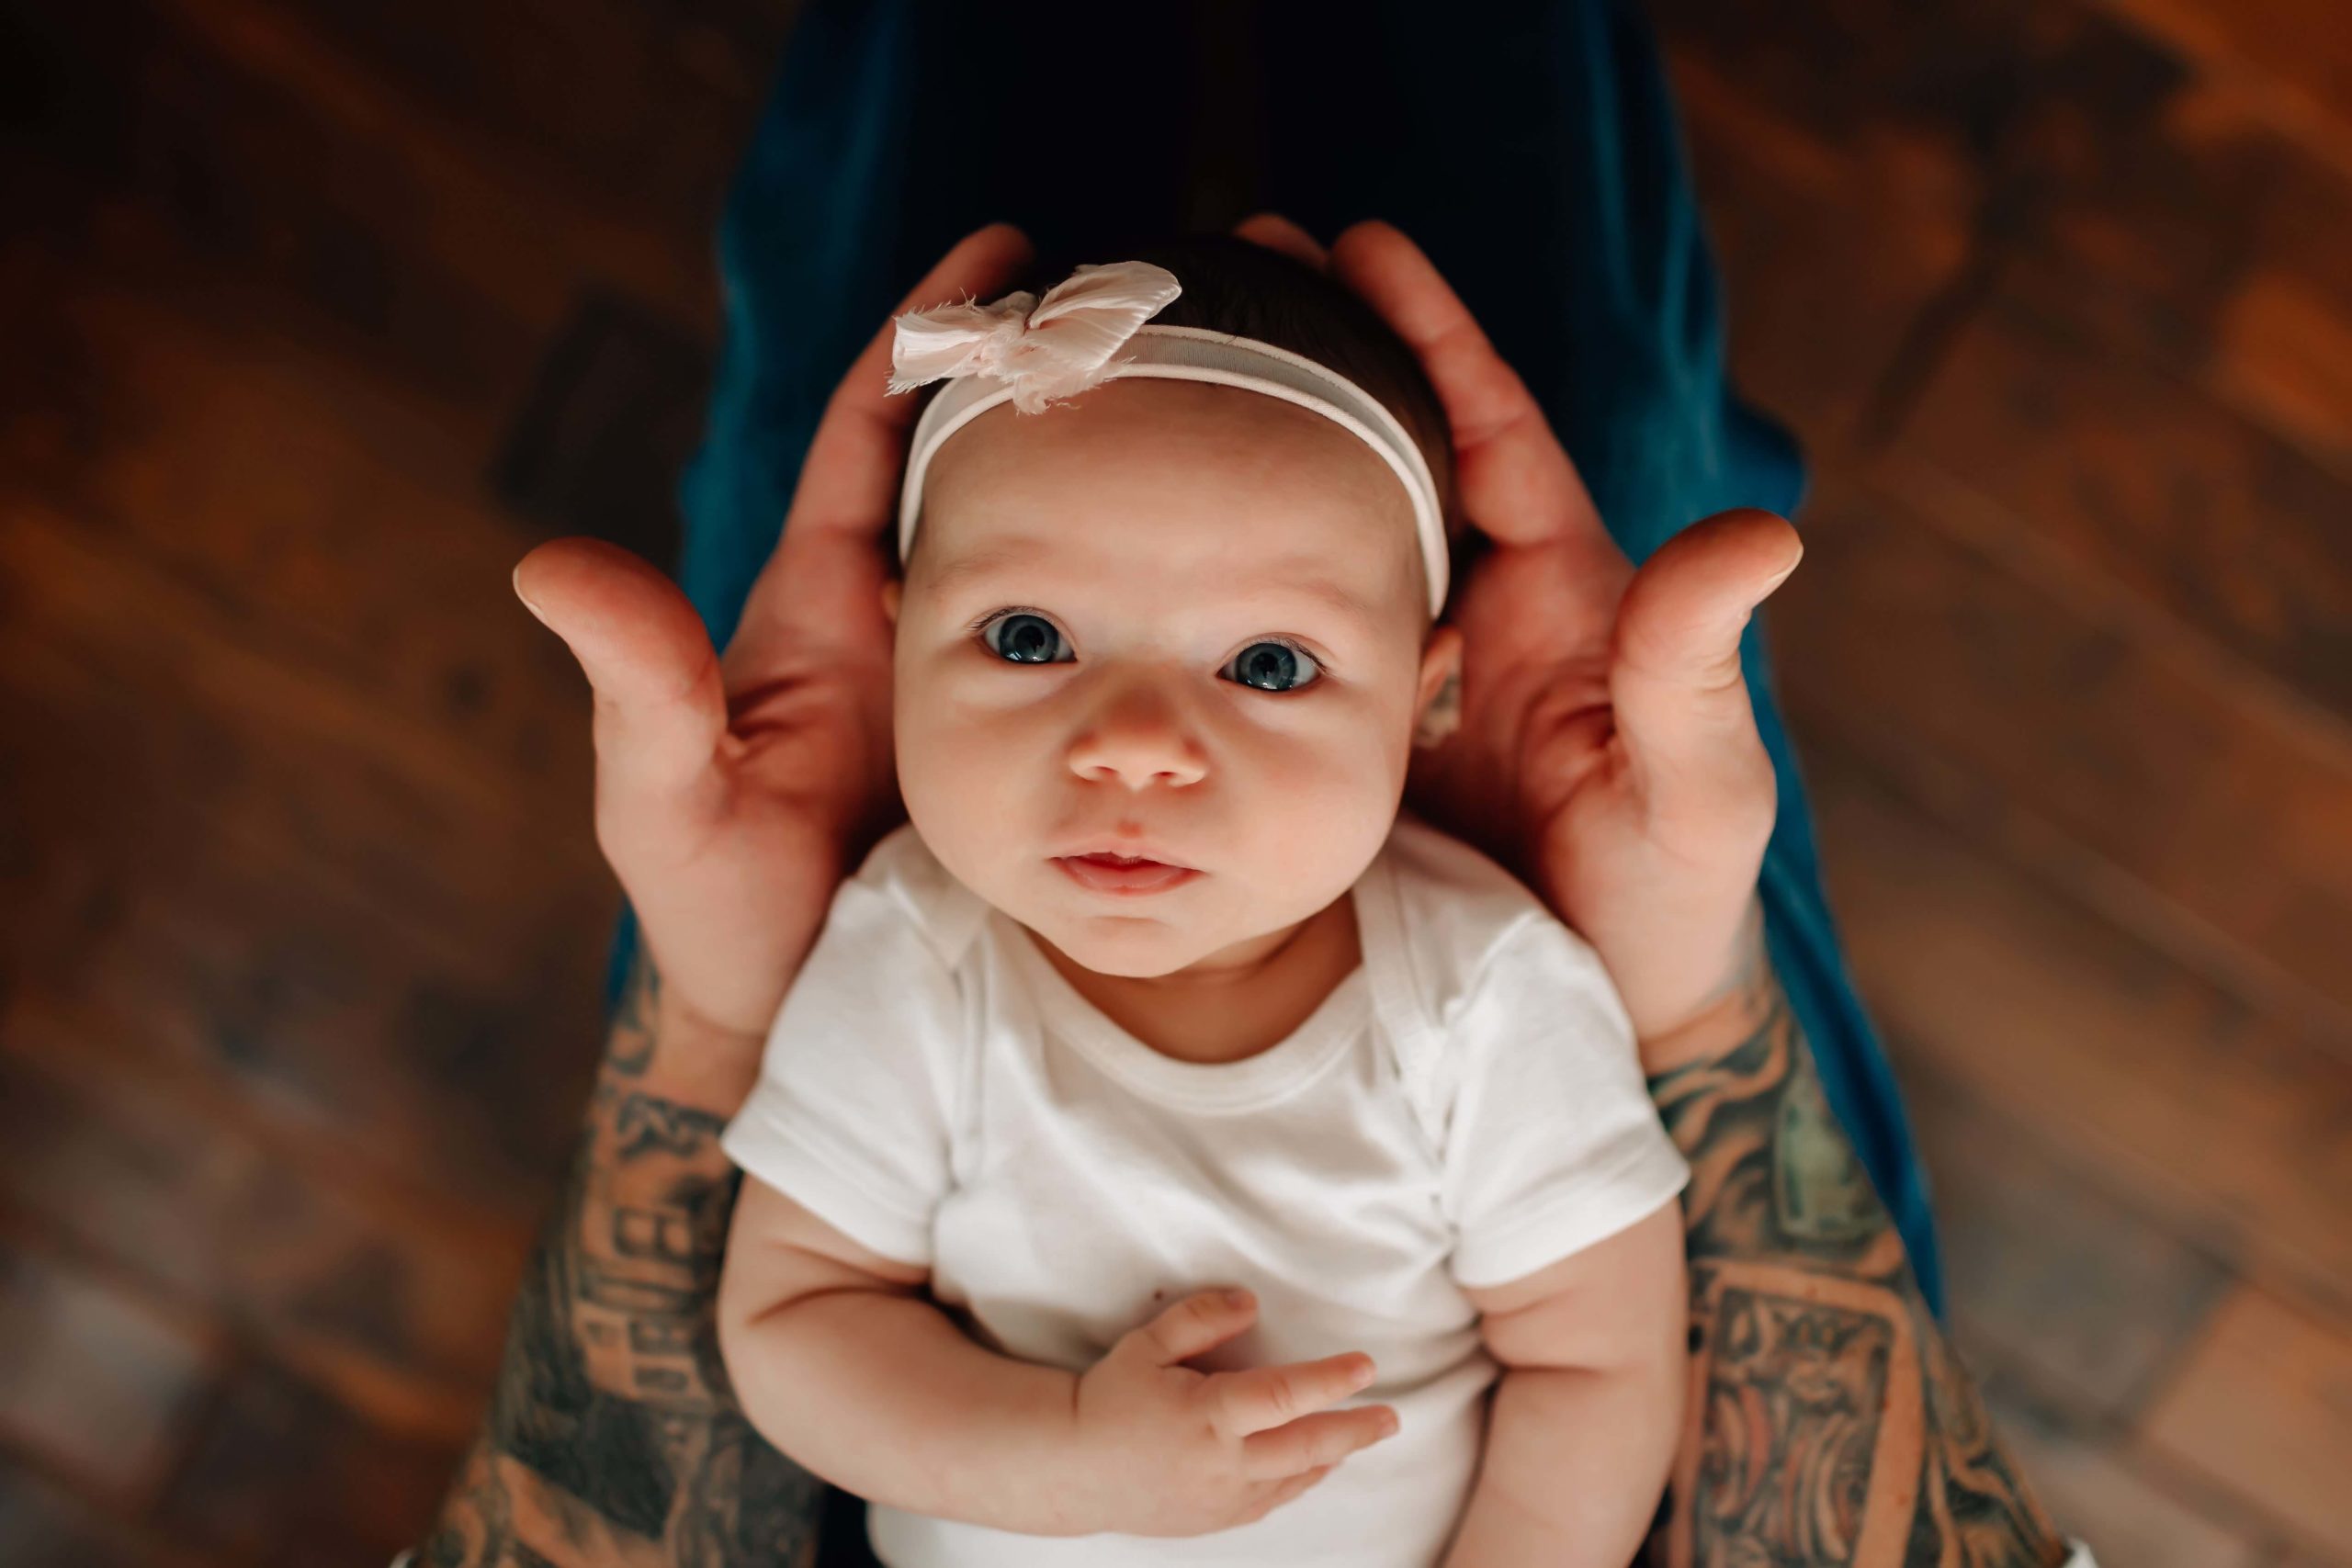 dad with arm tattoos holding newborn, newborn with pink bow